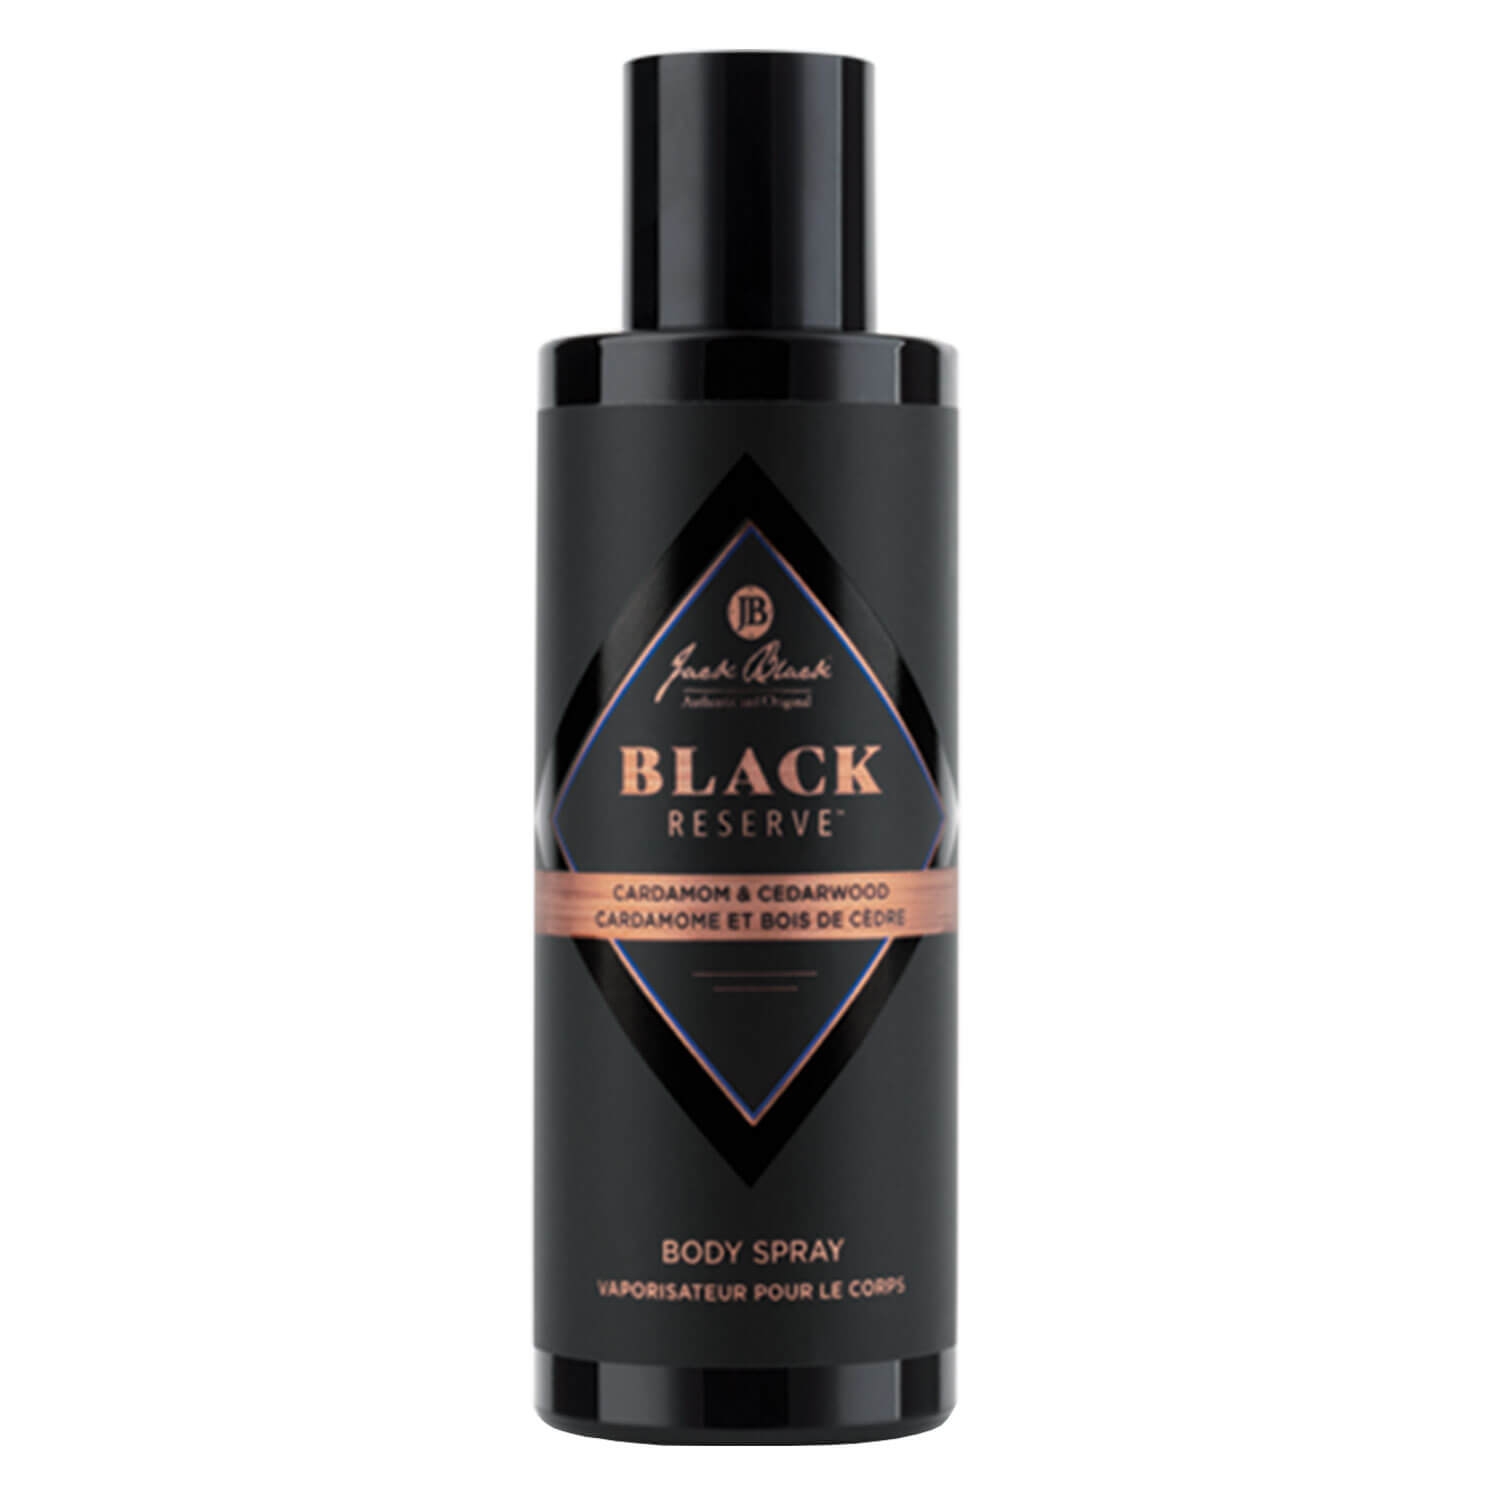 Product image from Black Reserve - Body Spray